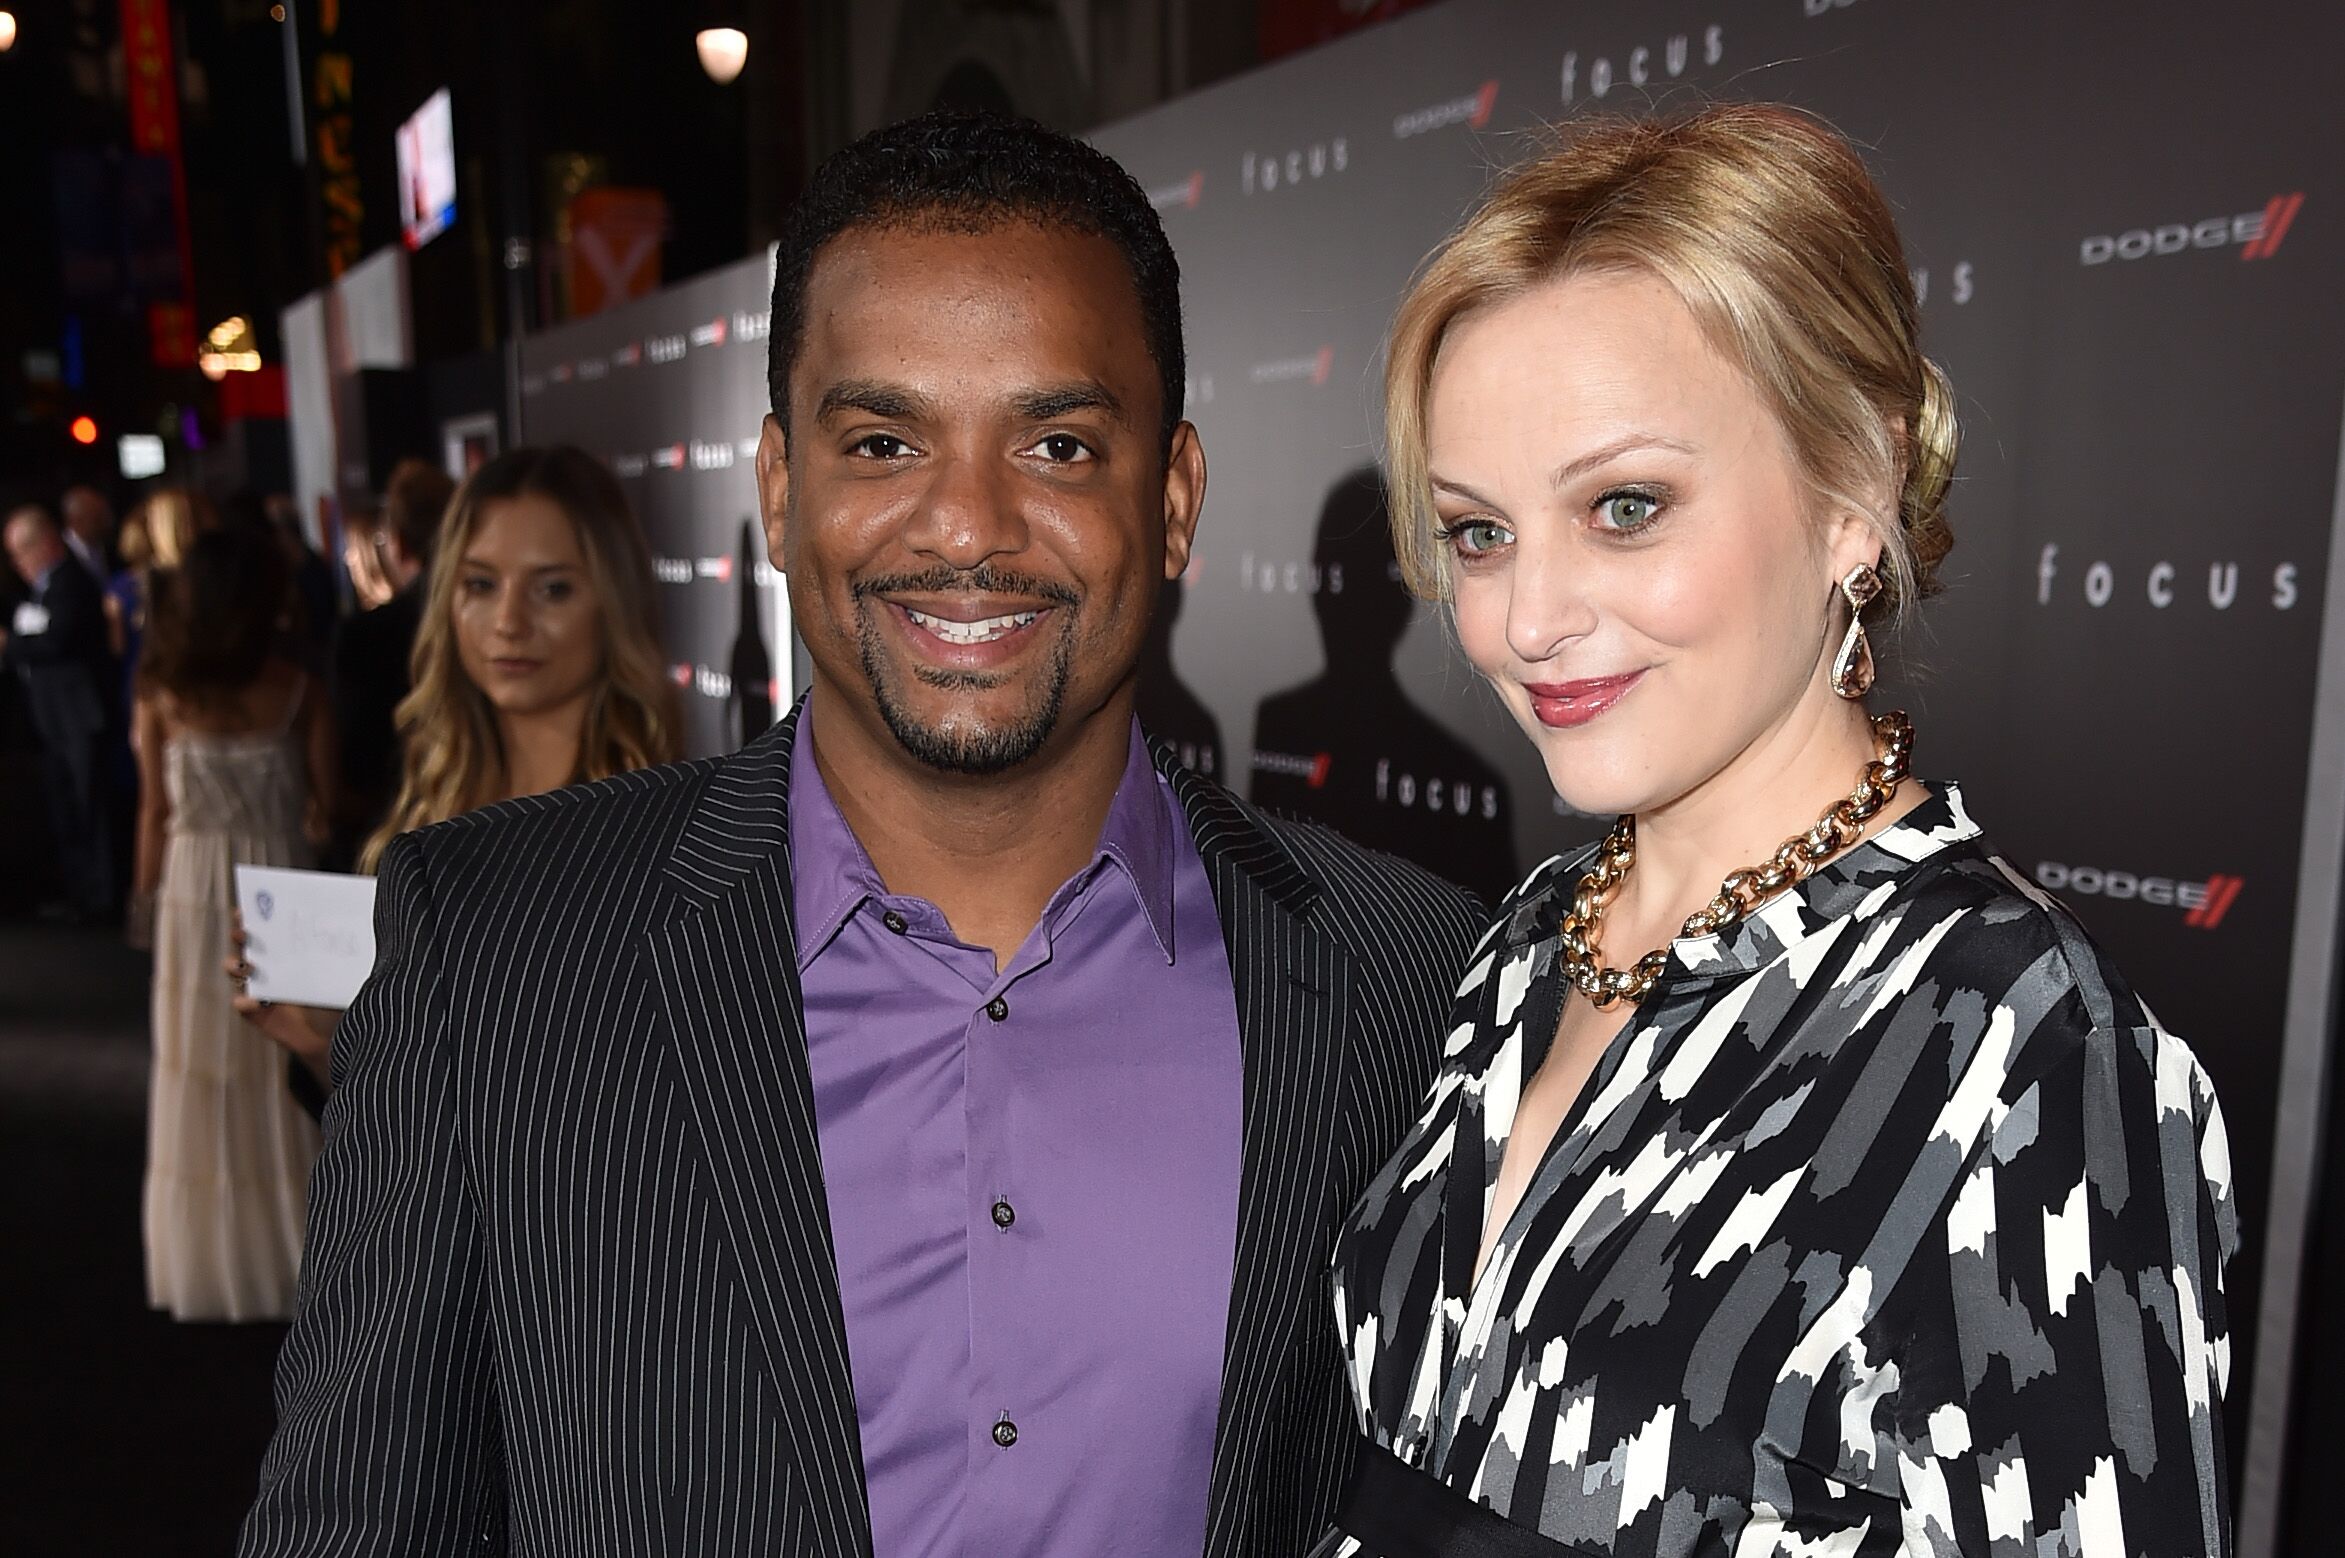 Alfonso Ribeiroand wife Angela Unkrich at the premiere of "Focus" at TCL Chinese Theatre in Los Angeles in 2015 | Source: Getty Images